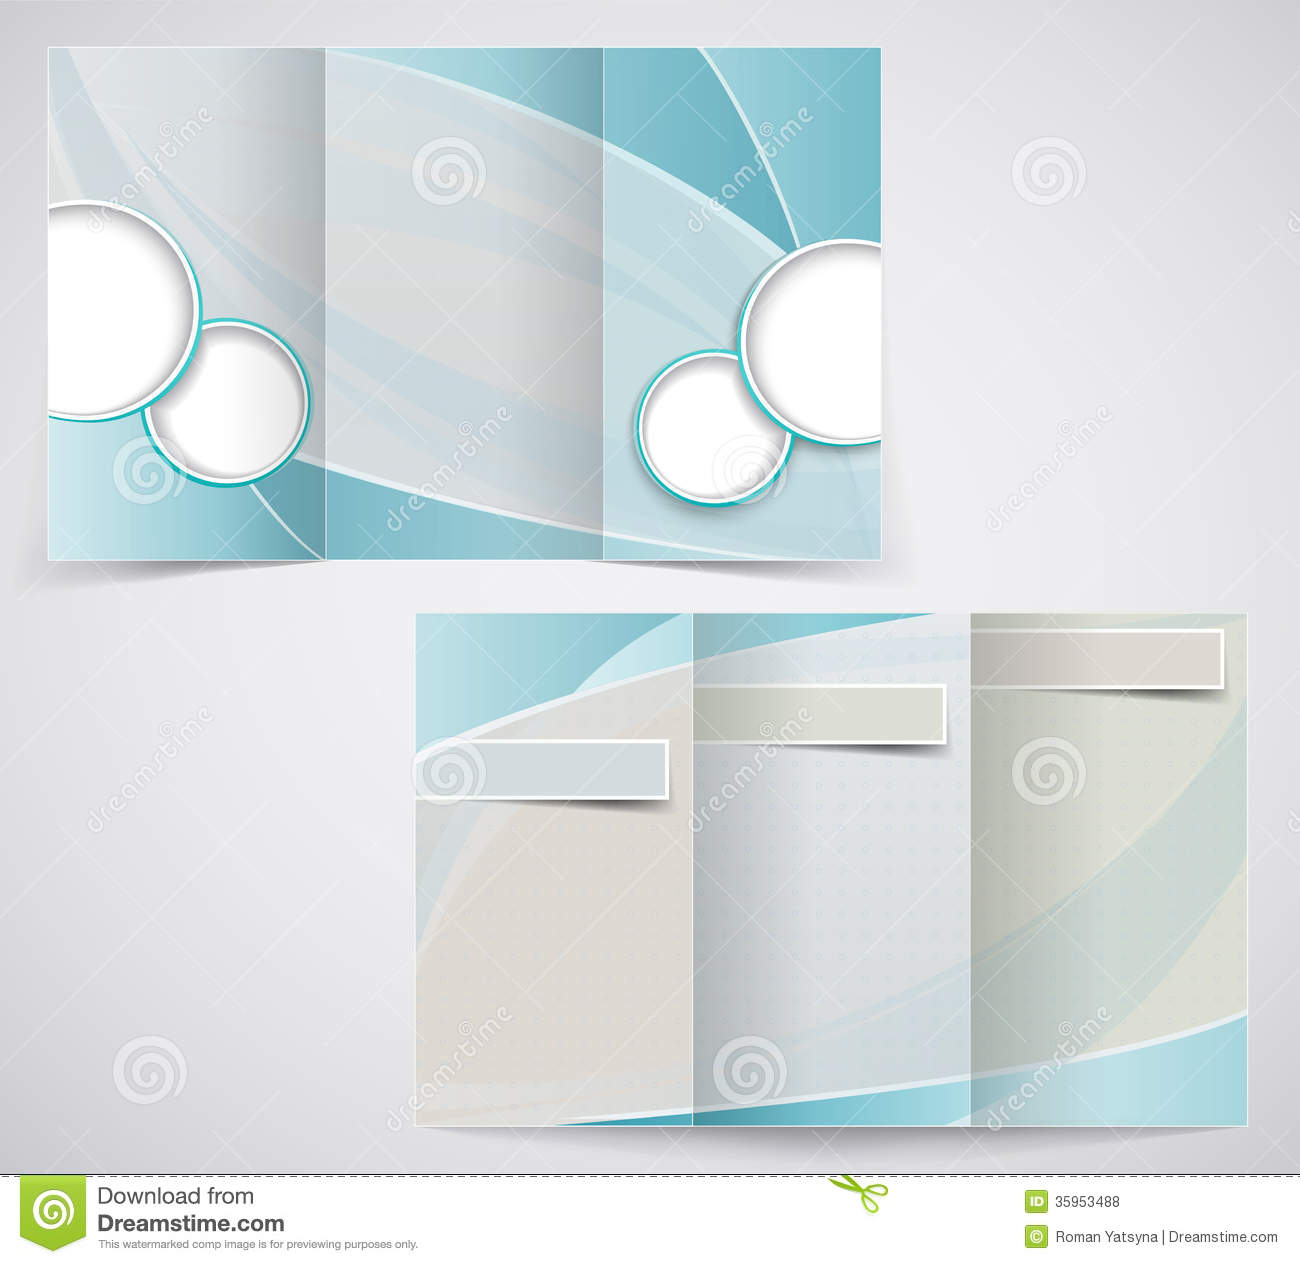 Tri Fold Business Brochure Template, Vector Blue D Stock Pertaining To Brochure Template Illustrator Free Download